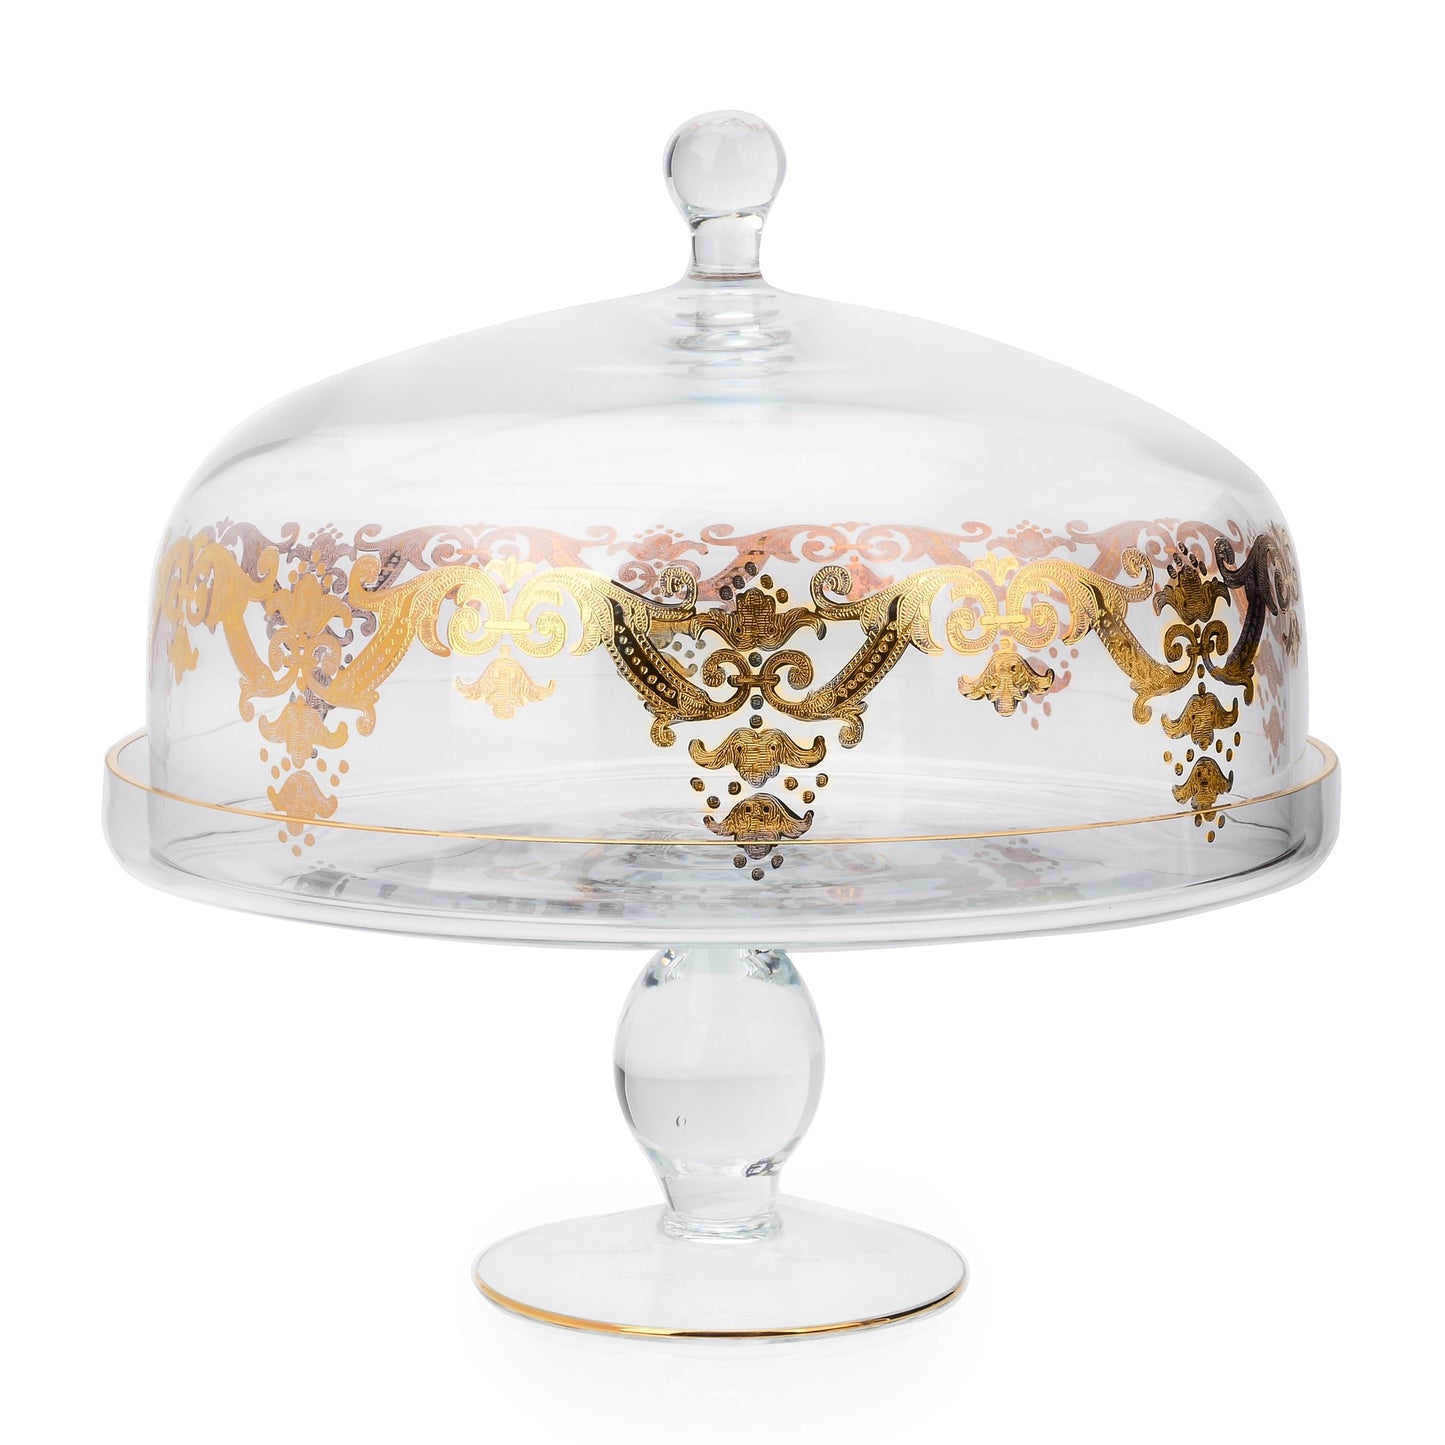 Classic Touch Decor Cake Dome Stand with 24k Gold Artwork, 12"